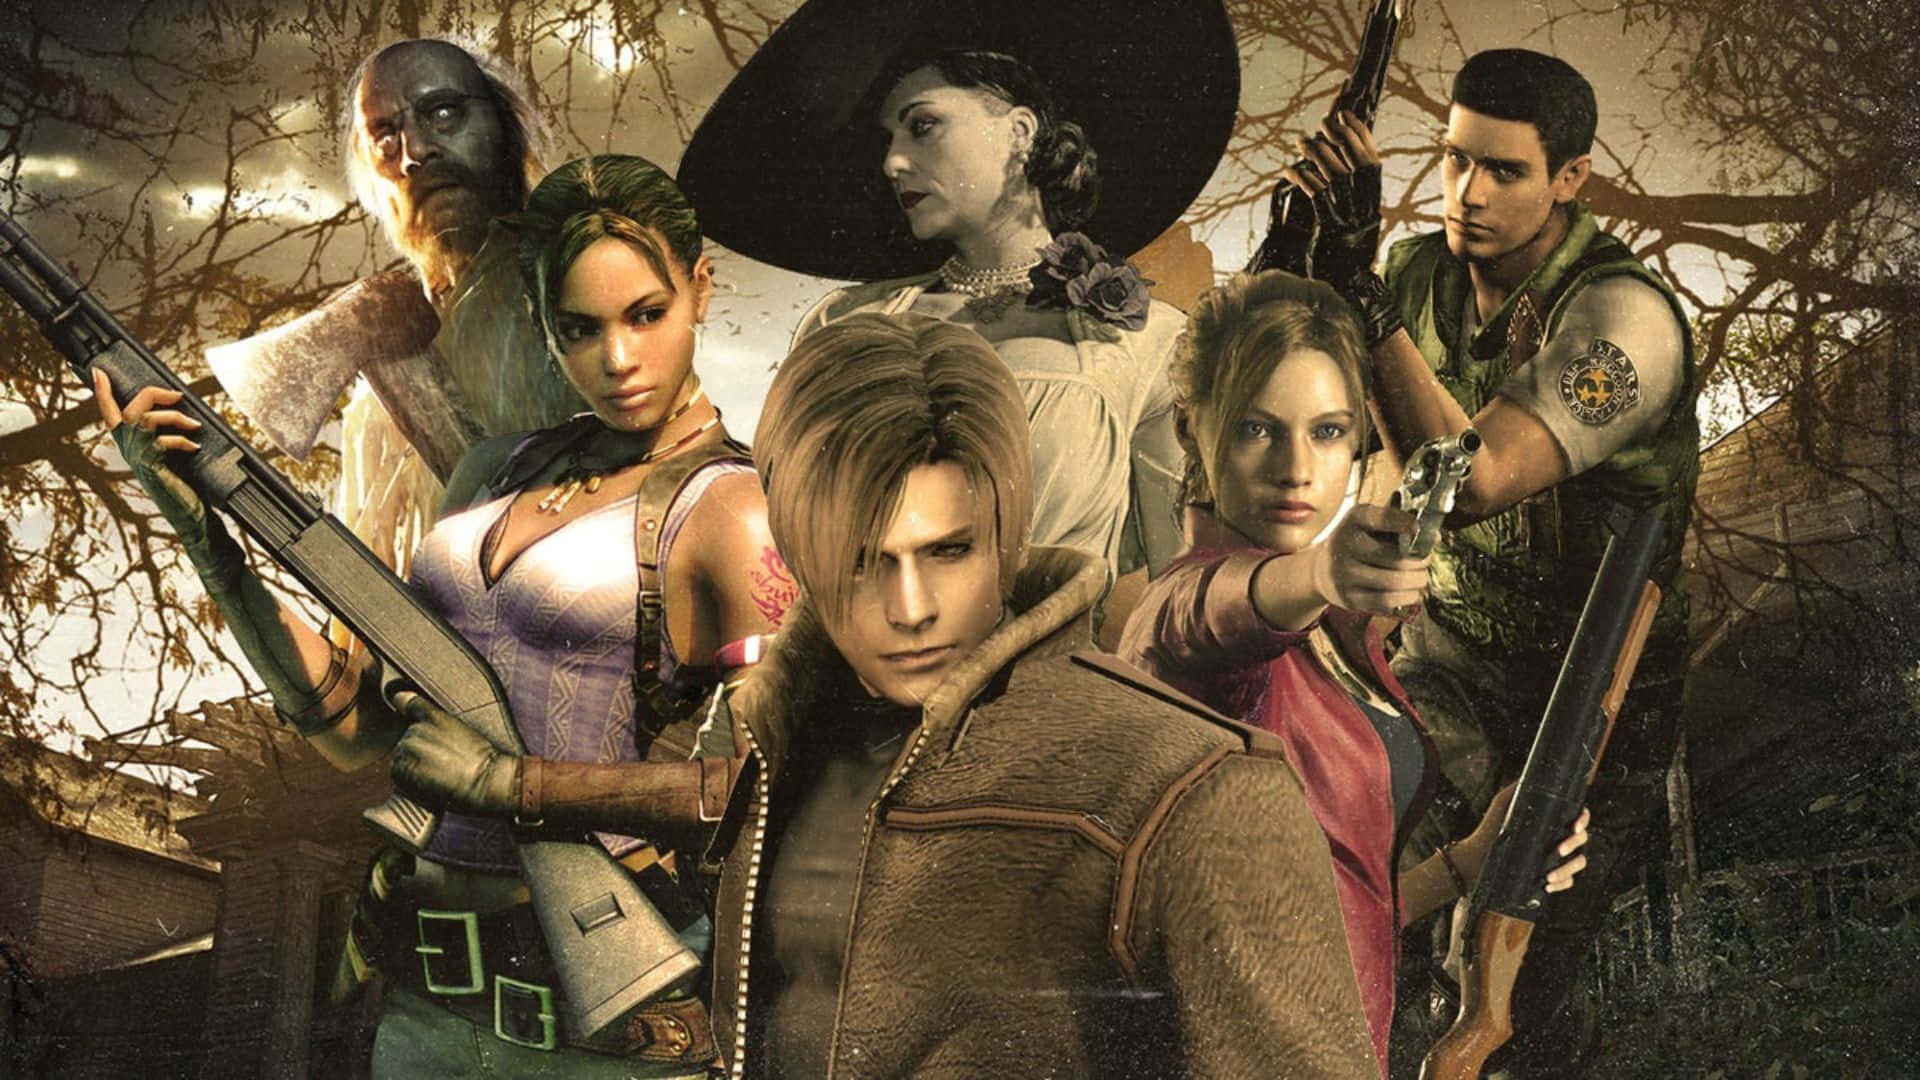 Iconic Resident Evil characters united in one action-packed frame Wallpaper